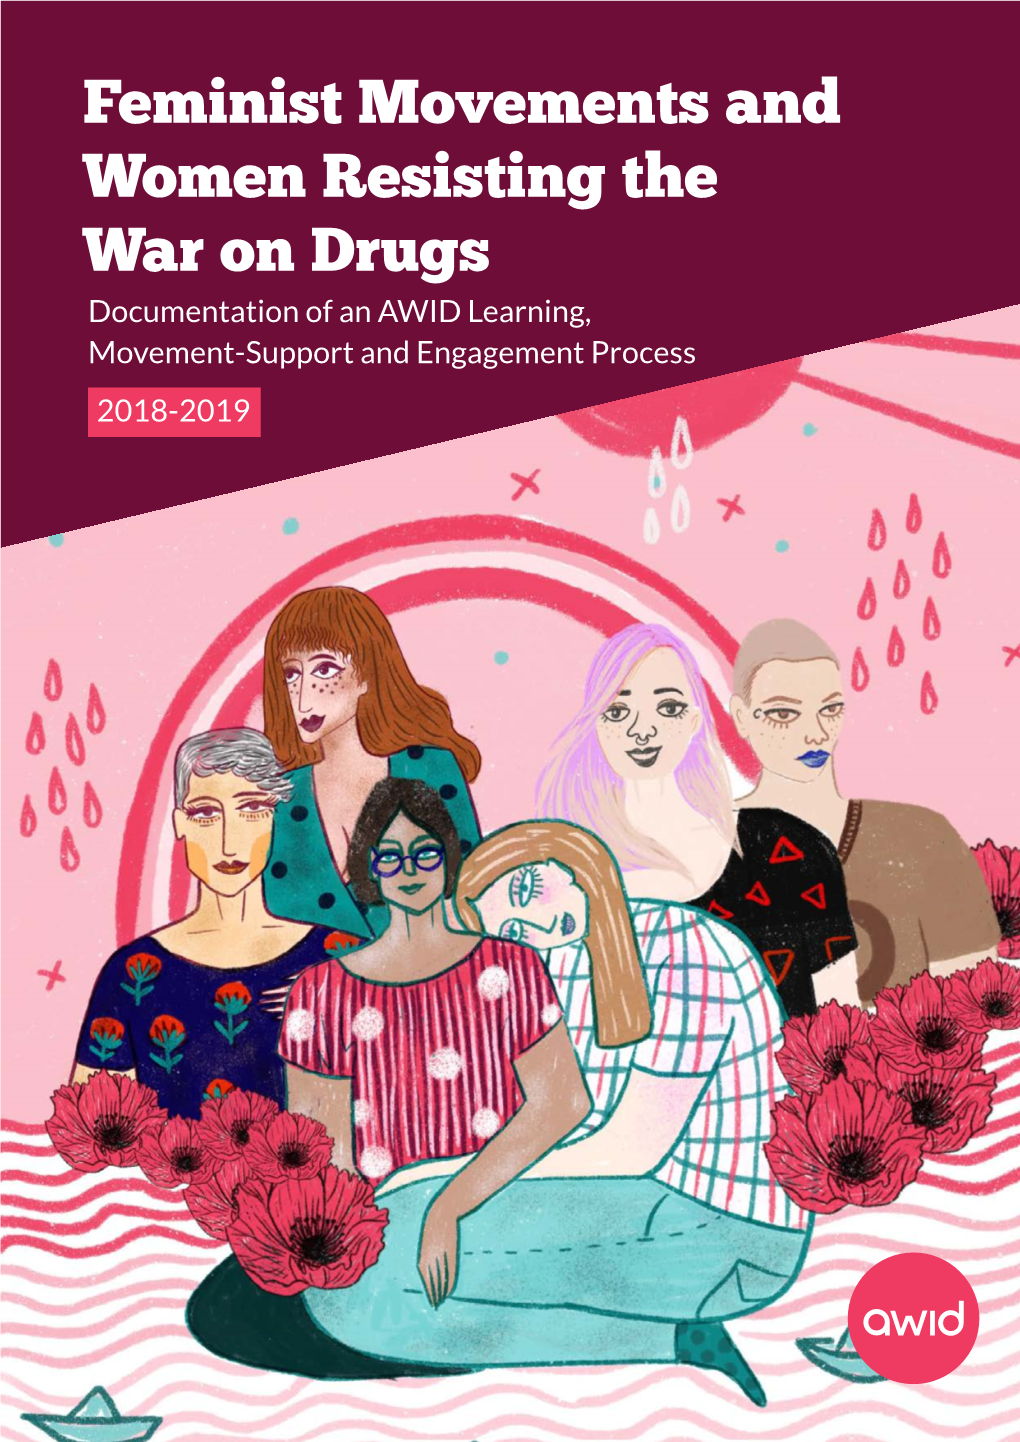 Feminist Movements and Women Resisting the War on Drugs